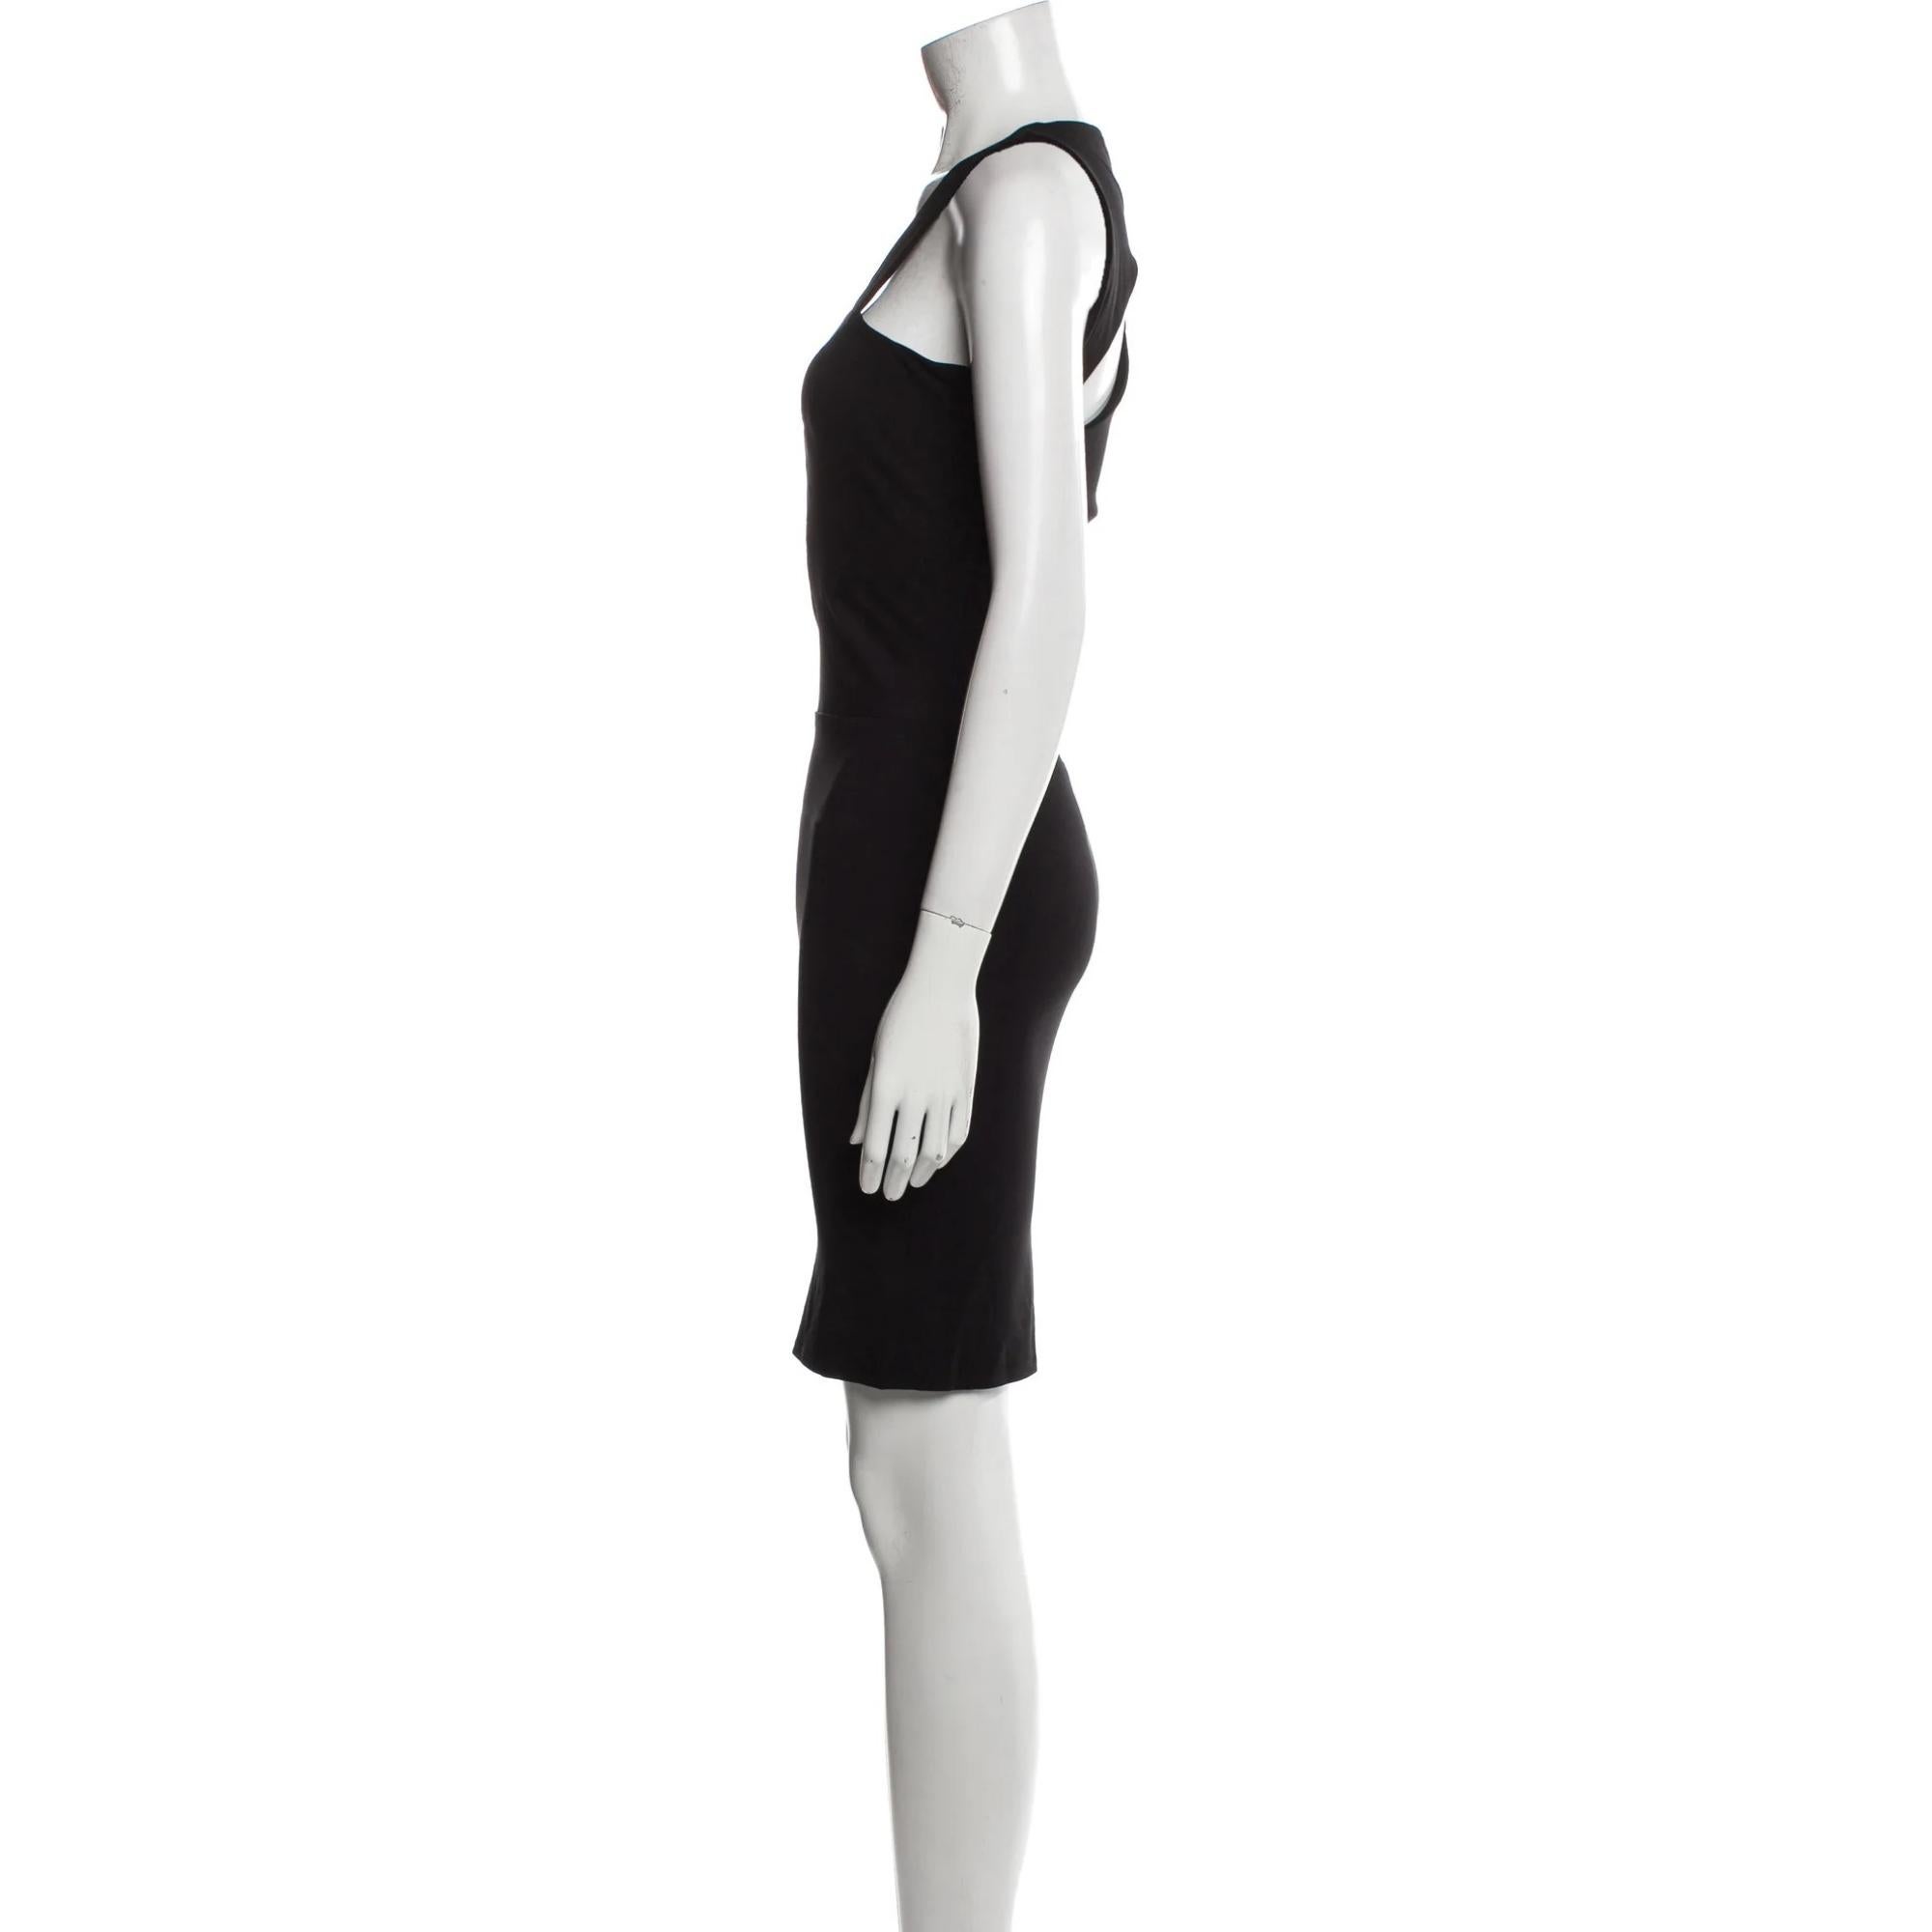 Mugler Dress. Black. Cutout Accent. Concealed Zip Closure at Side.

Color: Black
Material: 78% Viscose, 18% Polyamide, 4% Elastane
Condition: Very good.
Size: S  US4, FR36

Measurements
Bust: 30”
Waist: 22.5”
Hip: 29.5”
Length: 35.75”

Made in Italy